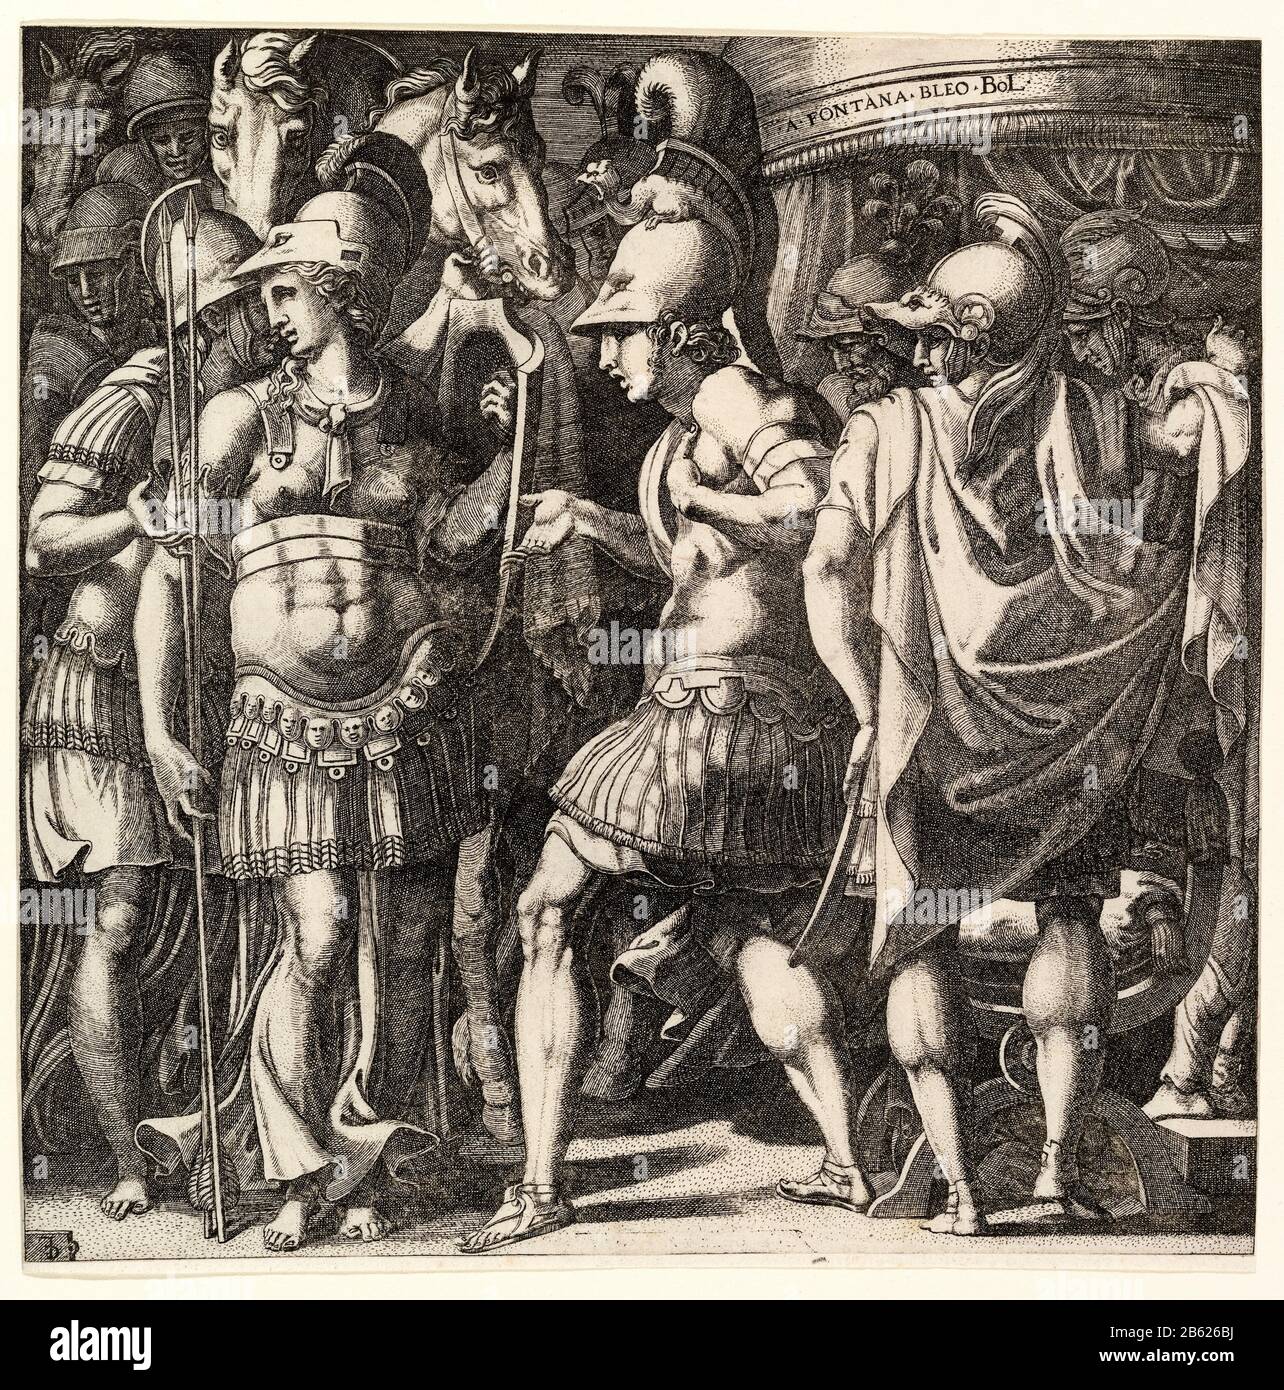 Alexander the Great welcoming Thalestris and the Amazons, engraving by Master FG, 1550-1560 Stock Photo